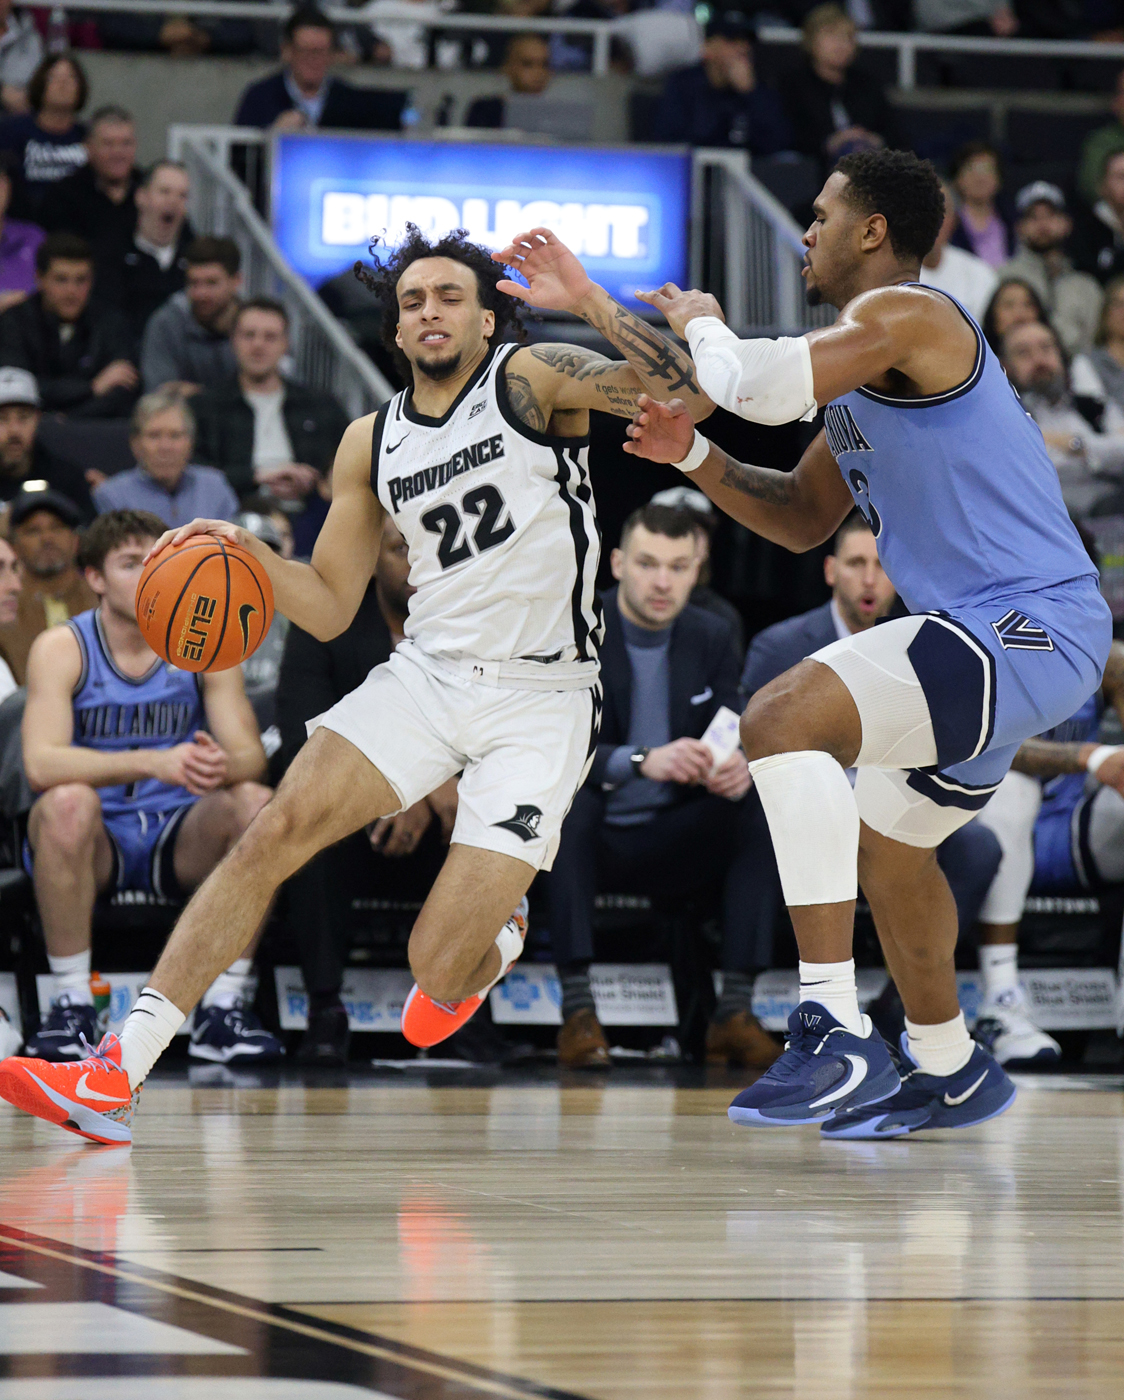 Friars hit the skids in ugly showing at Villanova